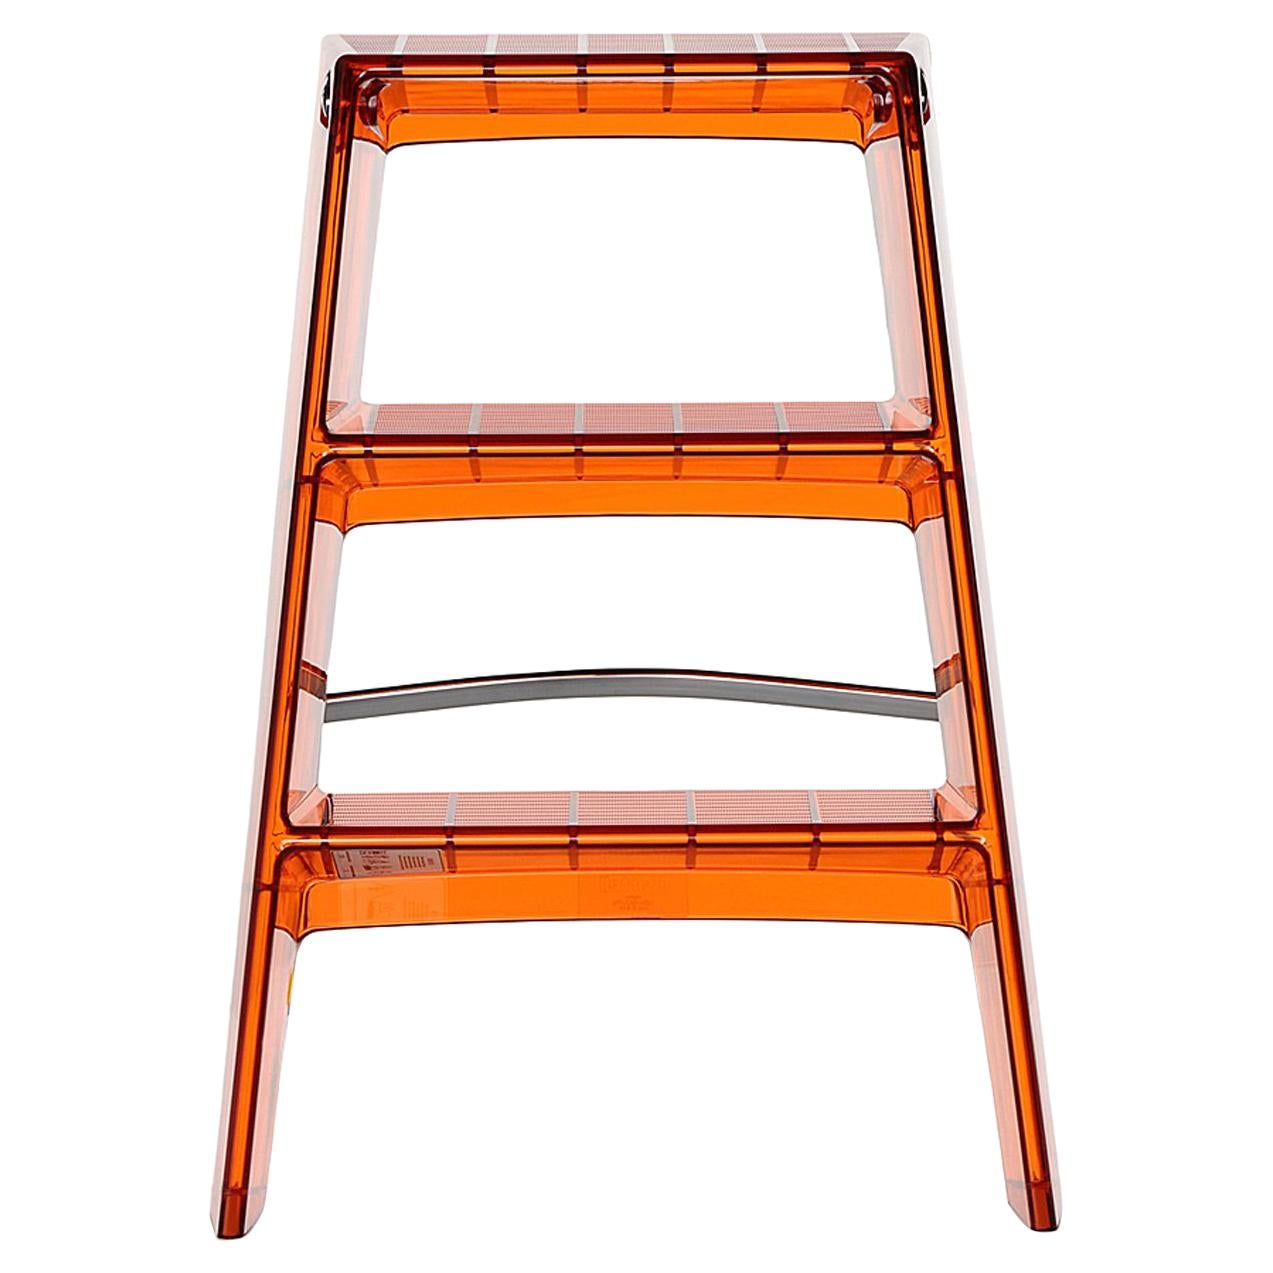 Kartell Upper Step Ladder in Orange Red by Alberto Meda, Paolo Rizzatto For Sale